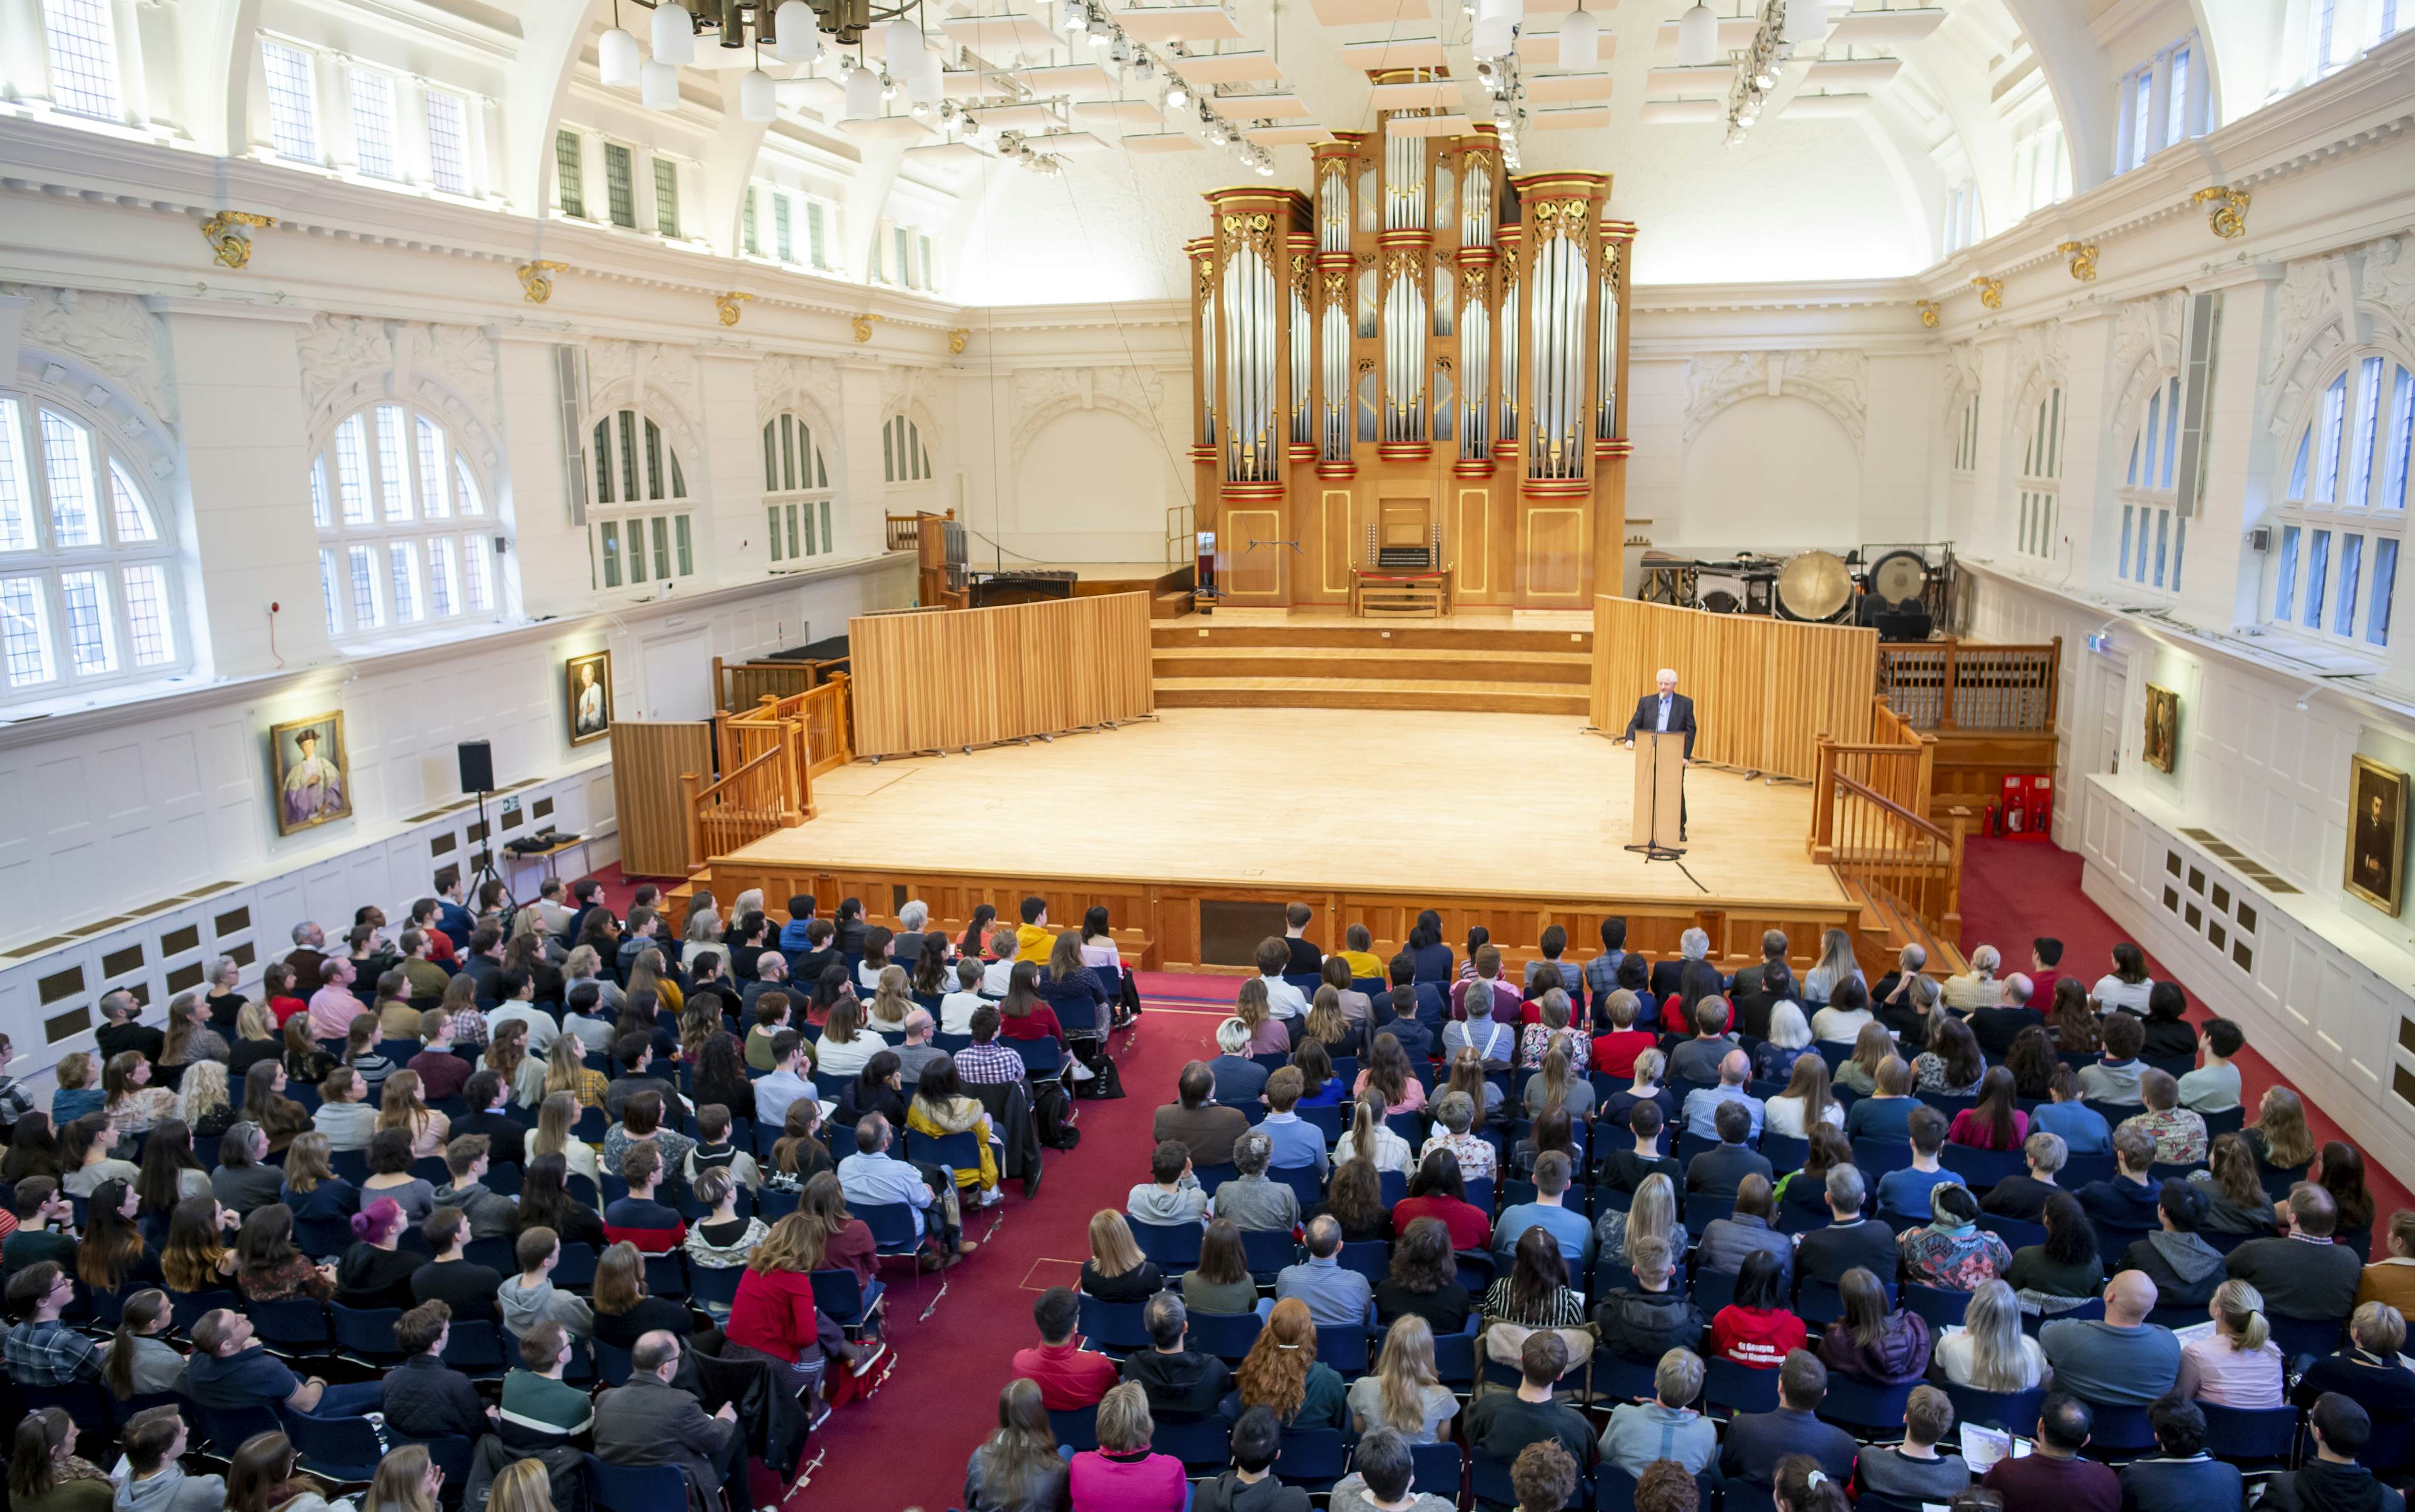 The Royal College of Music - Amaryllis Fleming Concert Hall image 1